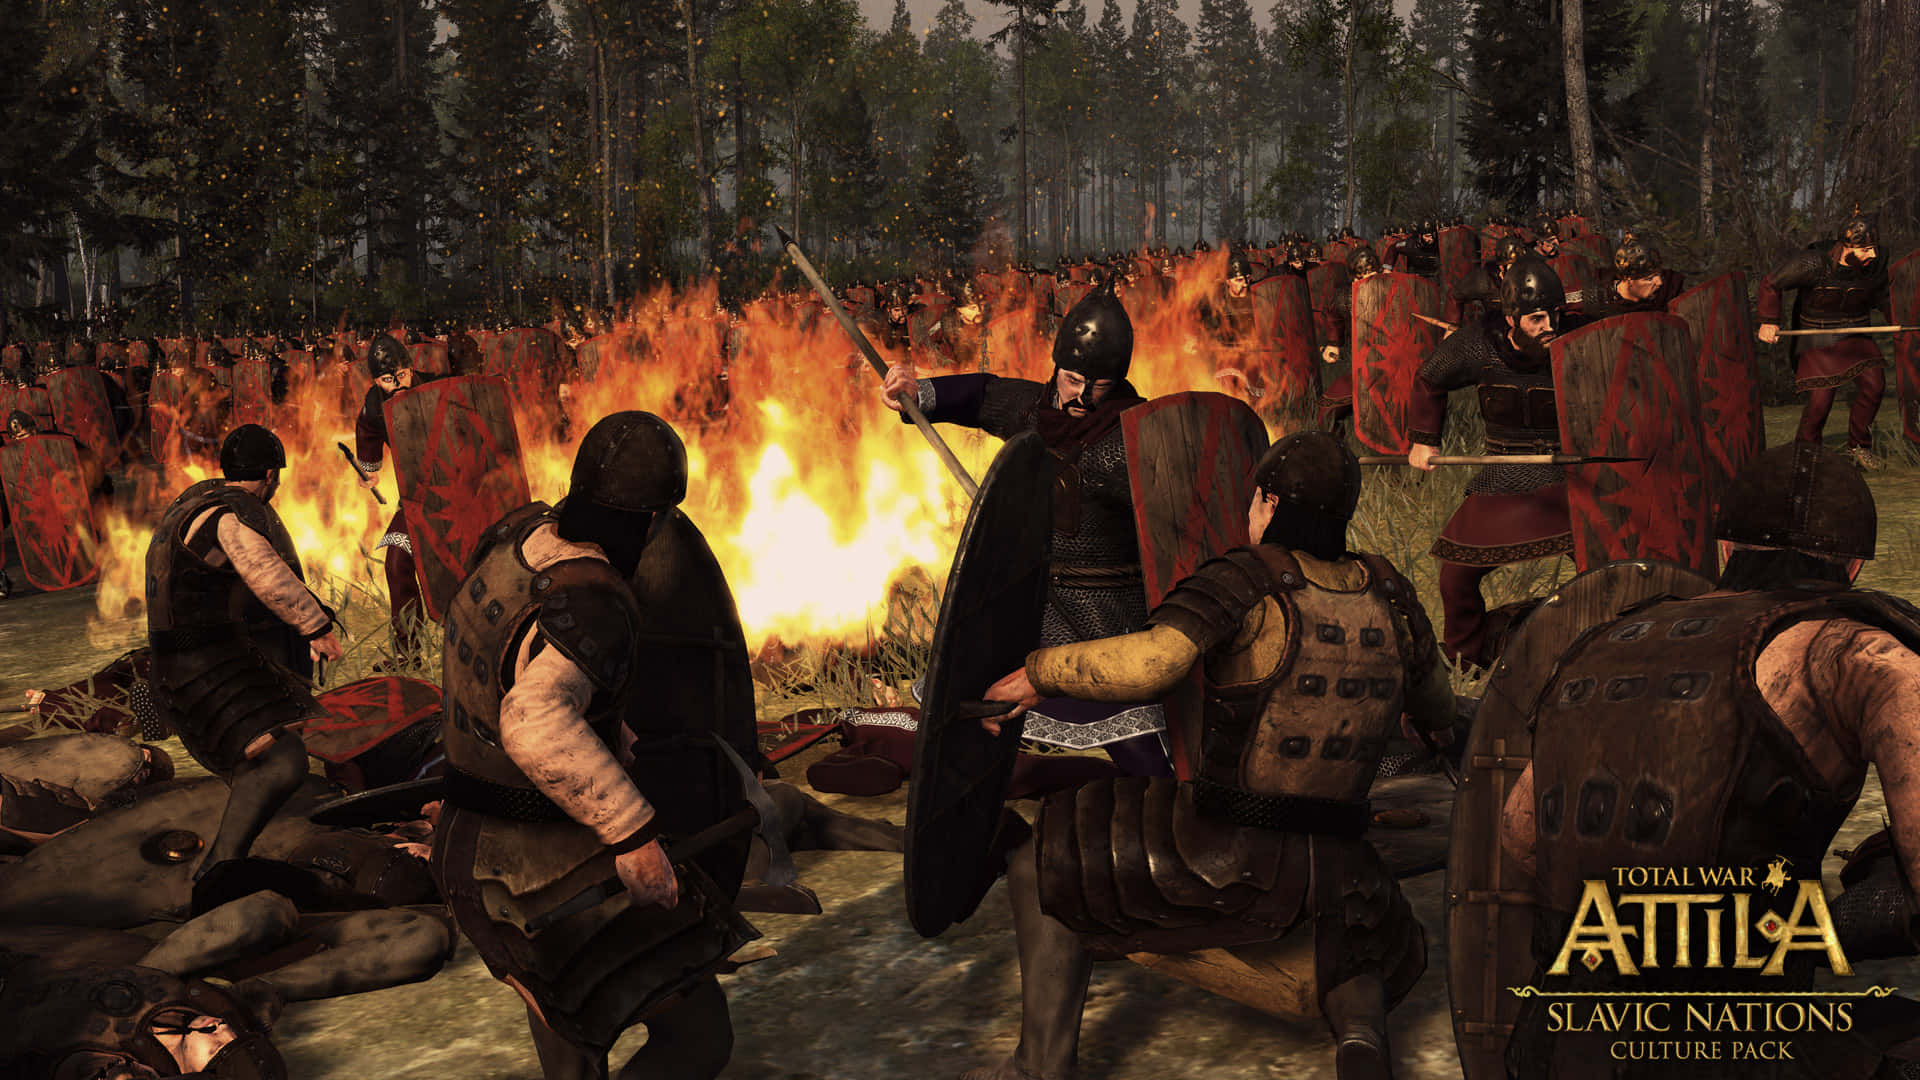 A Group Of People In Armor Standing In Front Of A Fire